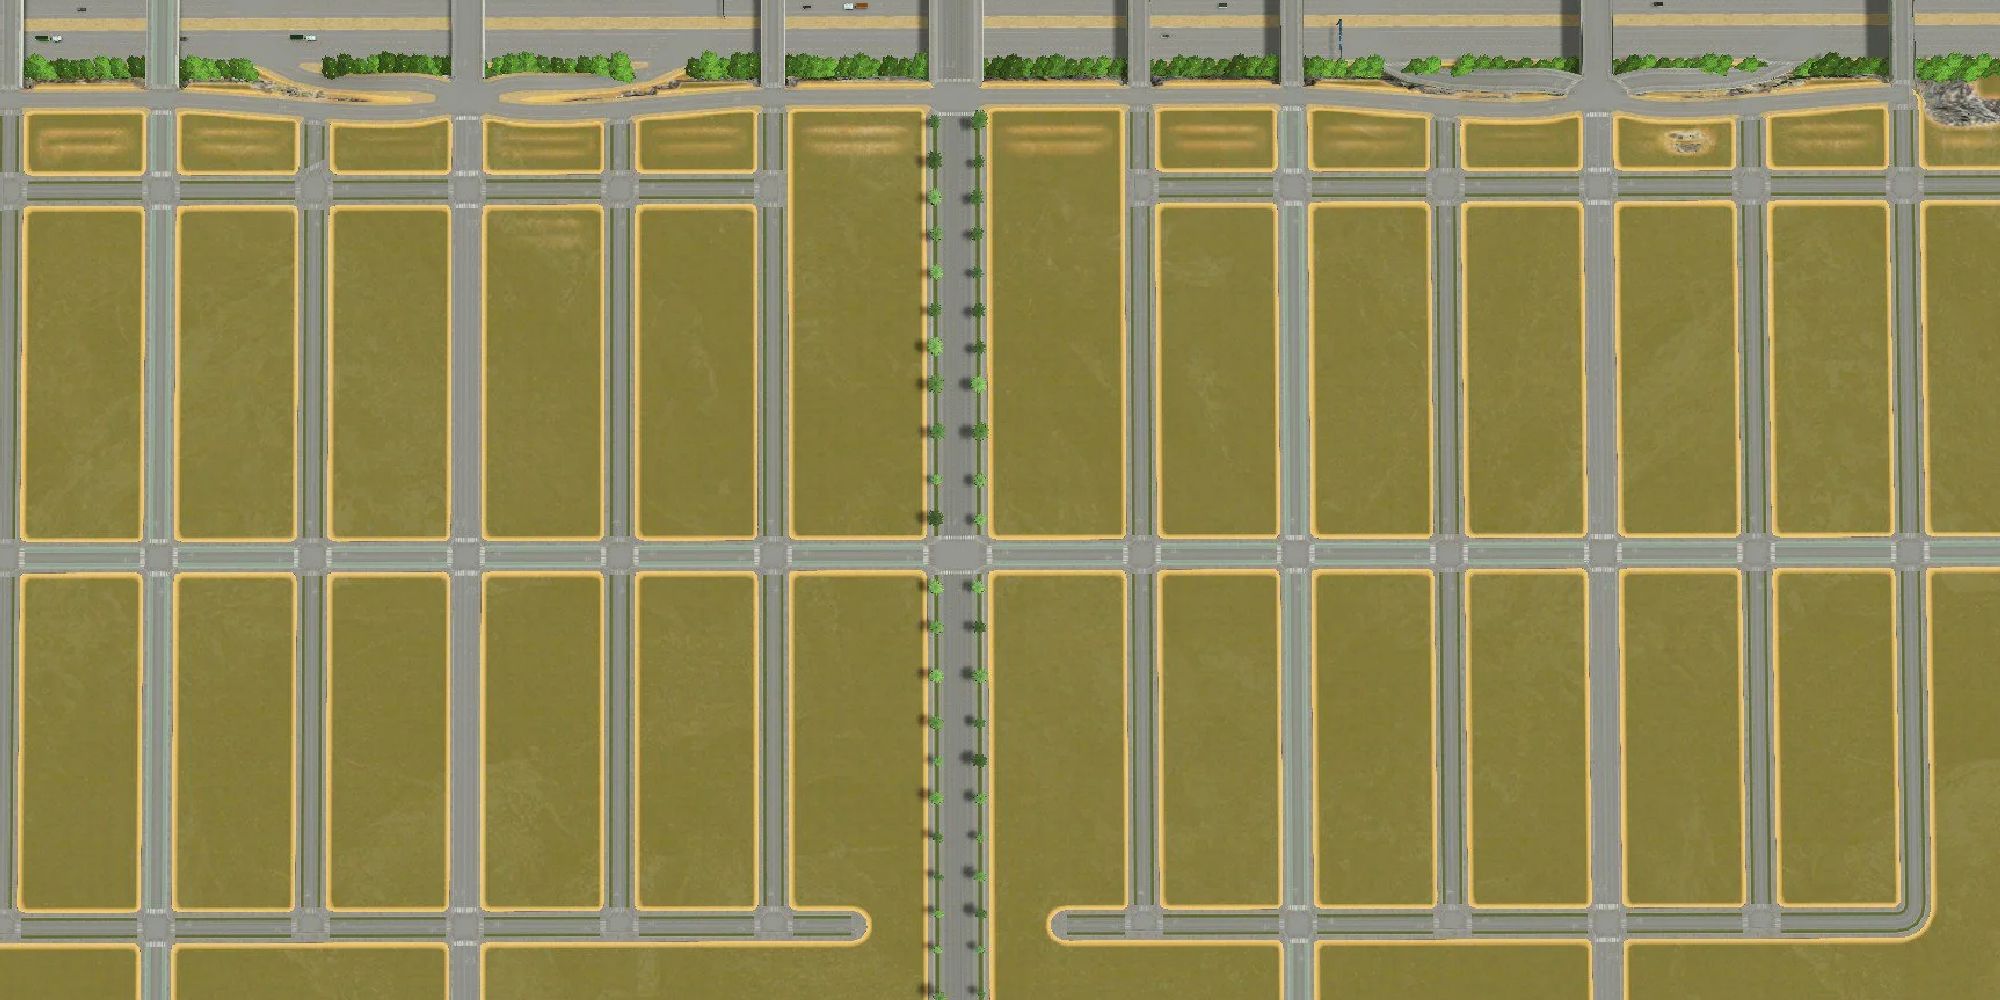 cities skylines grid with no buildings 